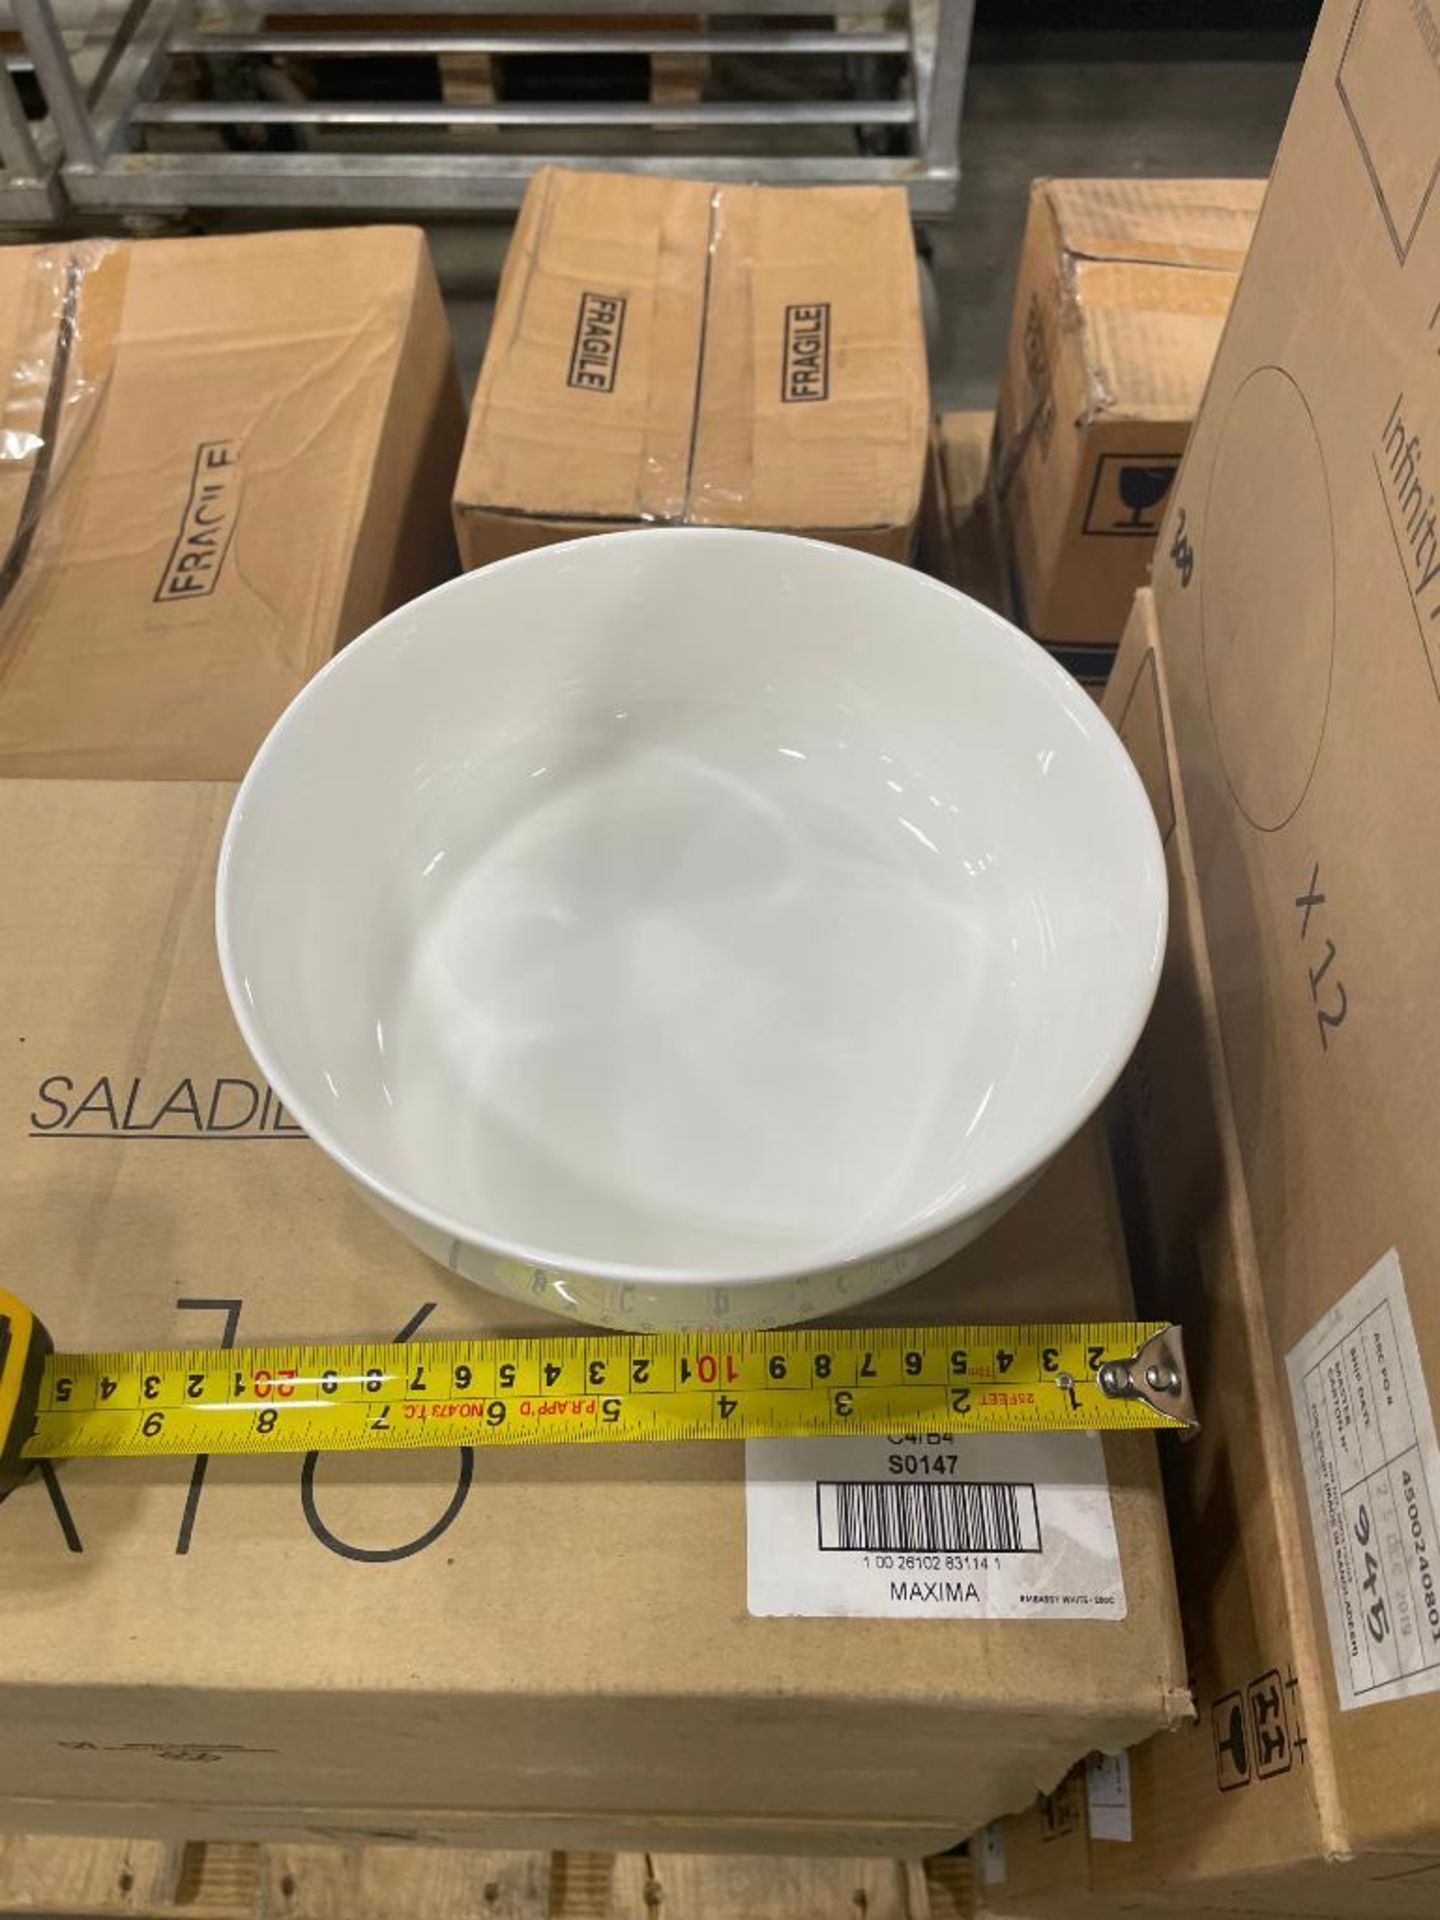 2 CASES OF 60OZ/1800ML WHITE PORCELAIN BOWLS, ARCOROC "EMBASSY" S0147 - LOT OF 32 - NEW - Image 4 of 6